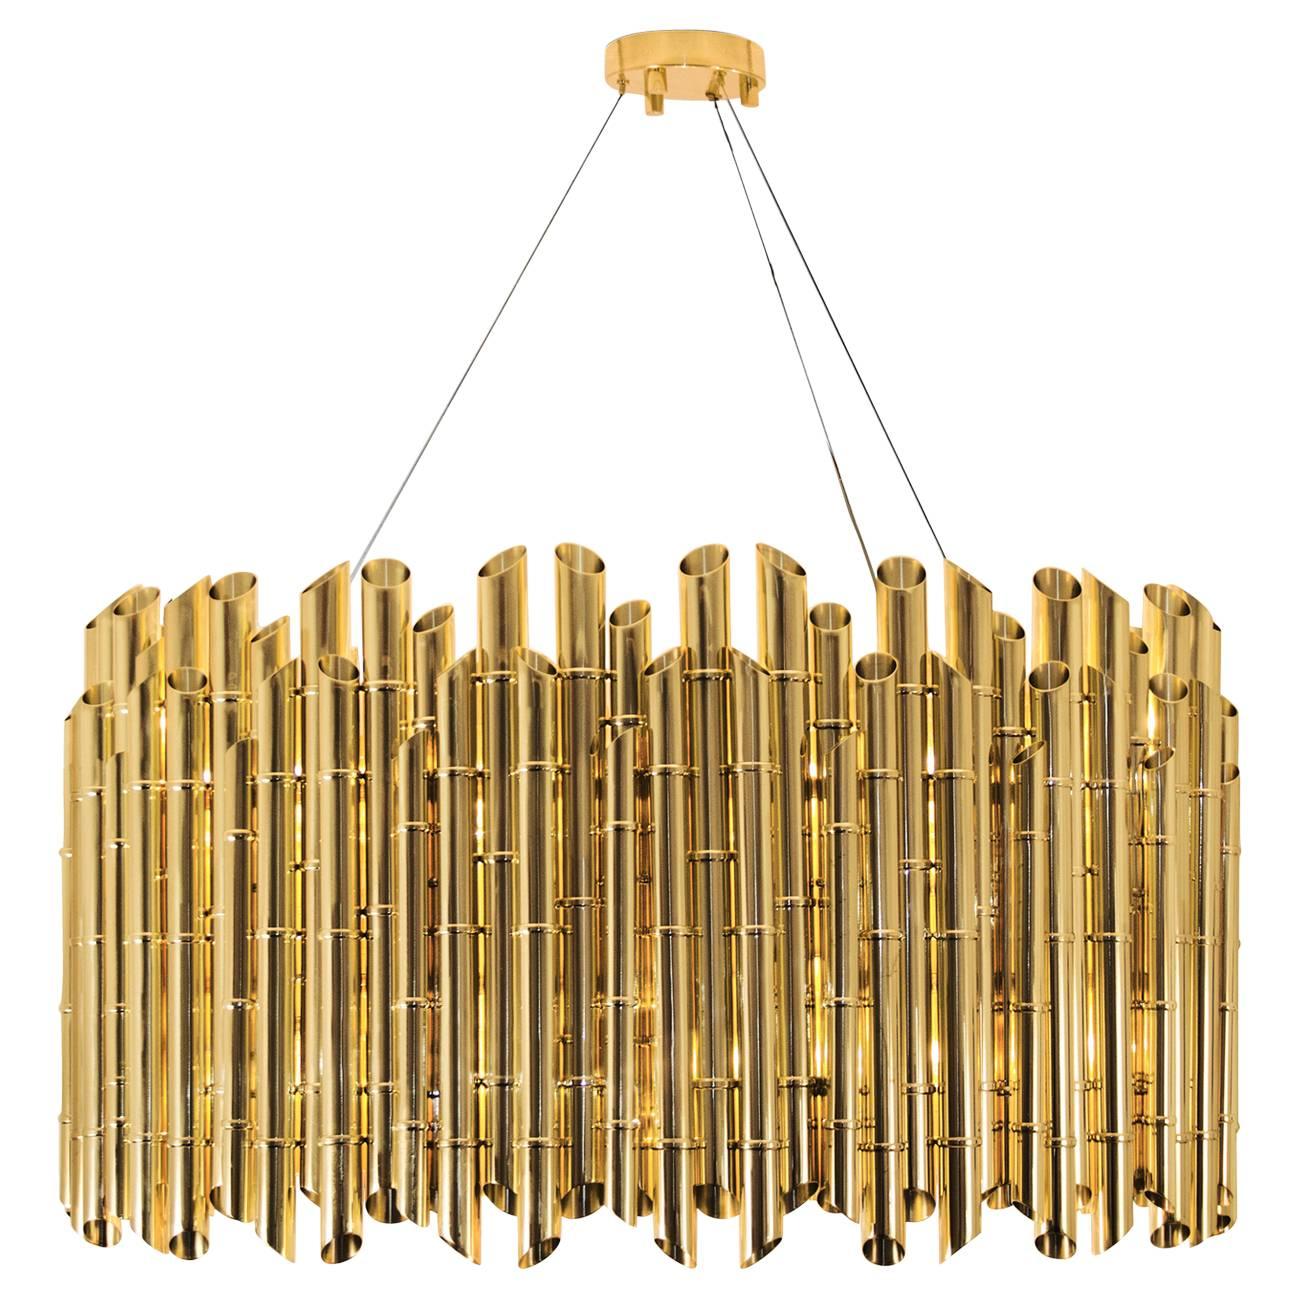 Bamboo Suspension in Glossy Brass